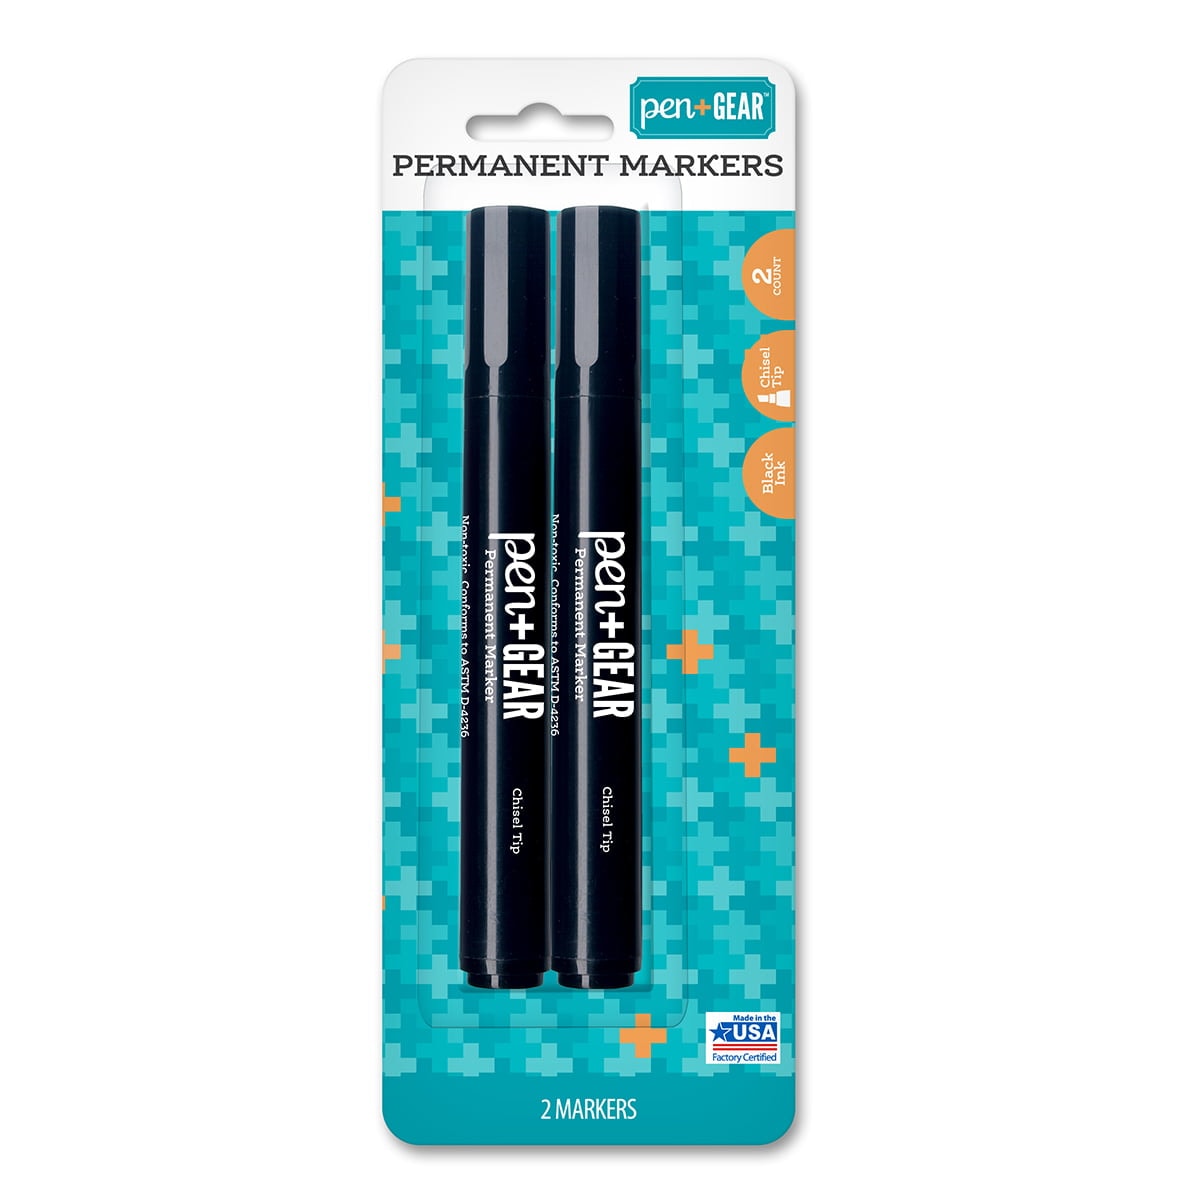 Washable Markers Pen+Gear Nontoxic, 10ct. Broad Lines Ages 3+ New In Box